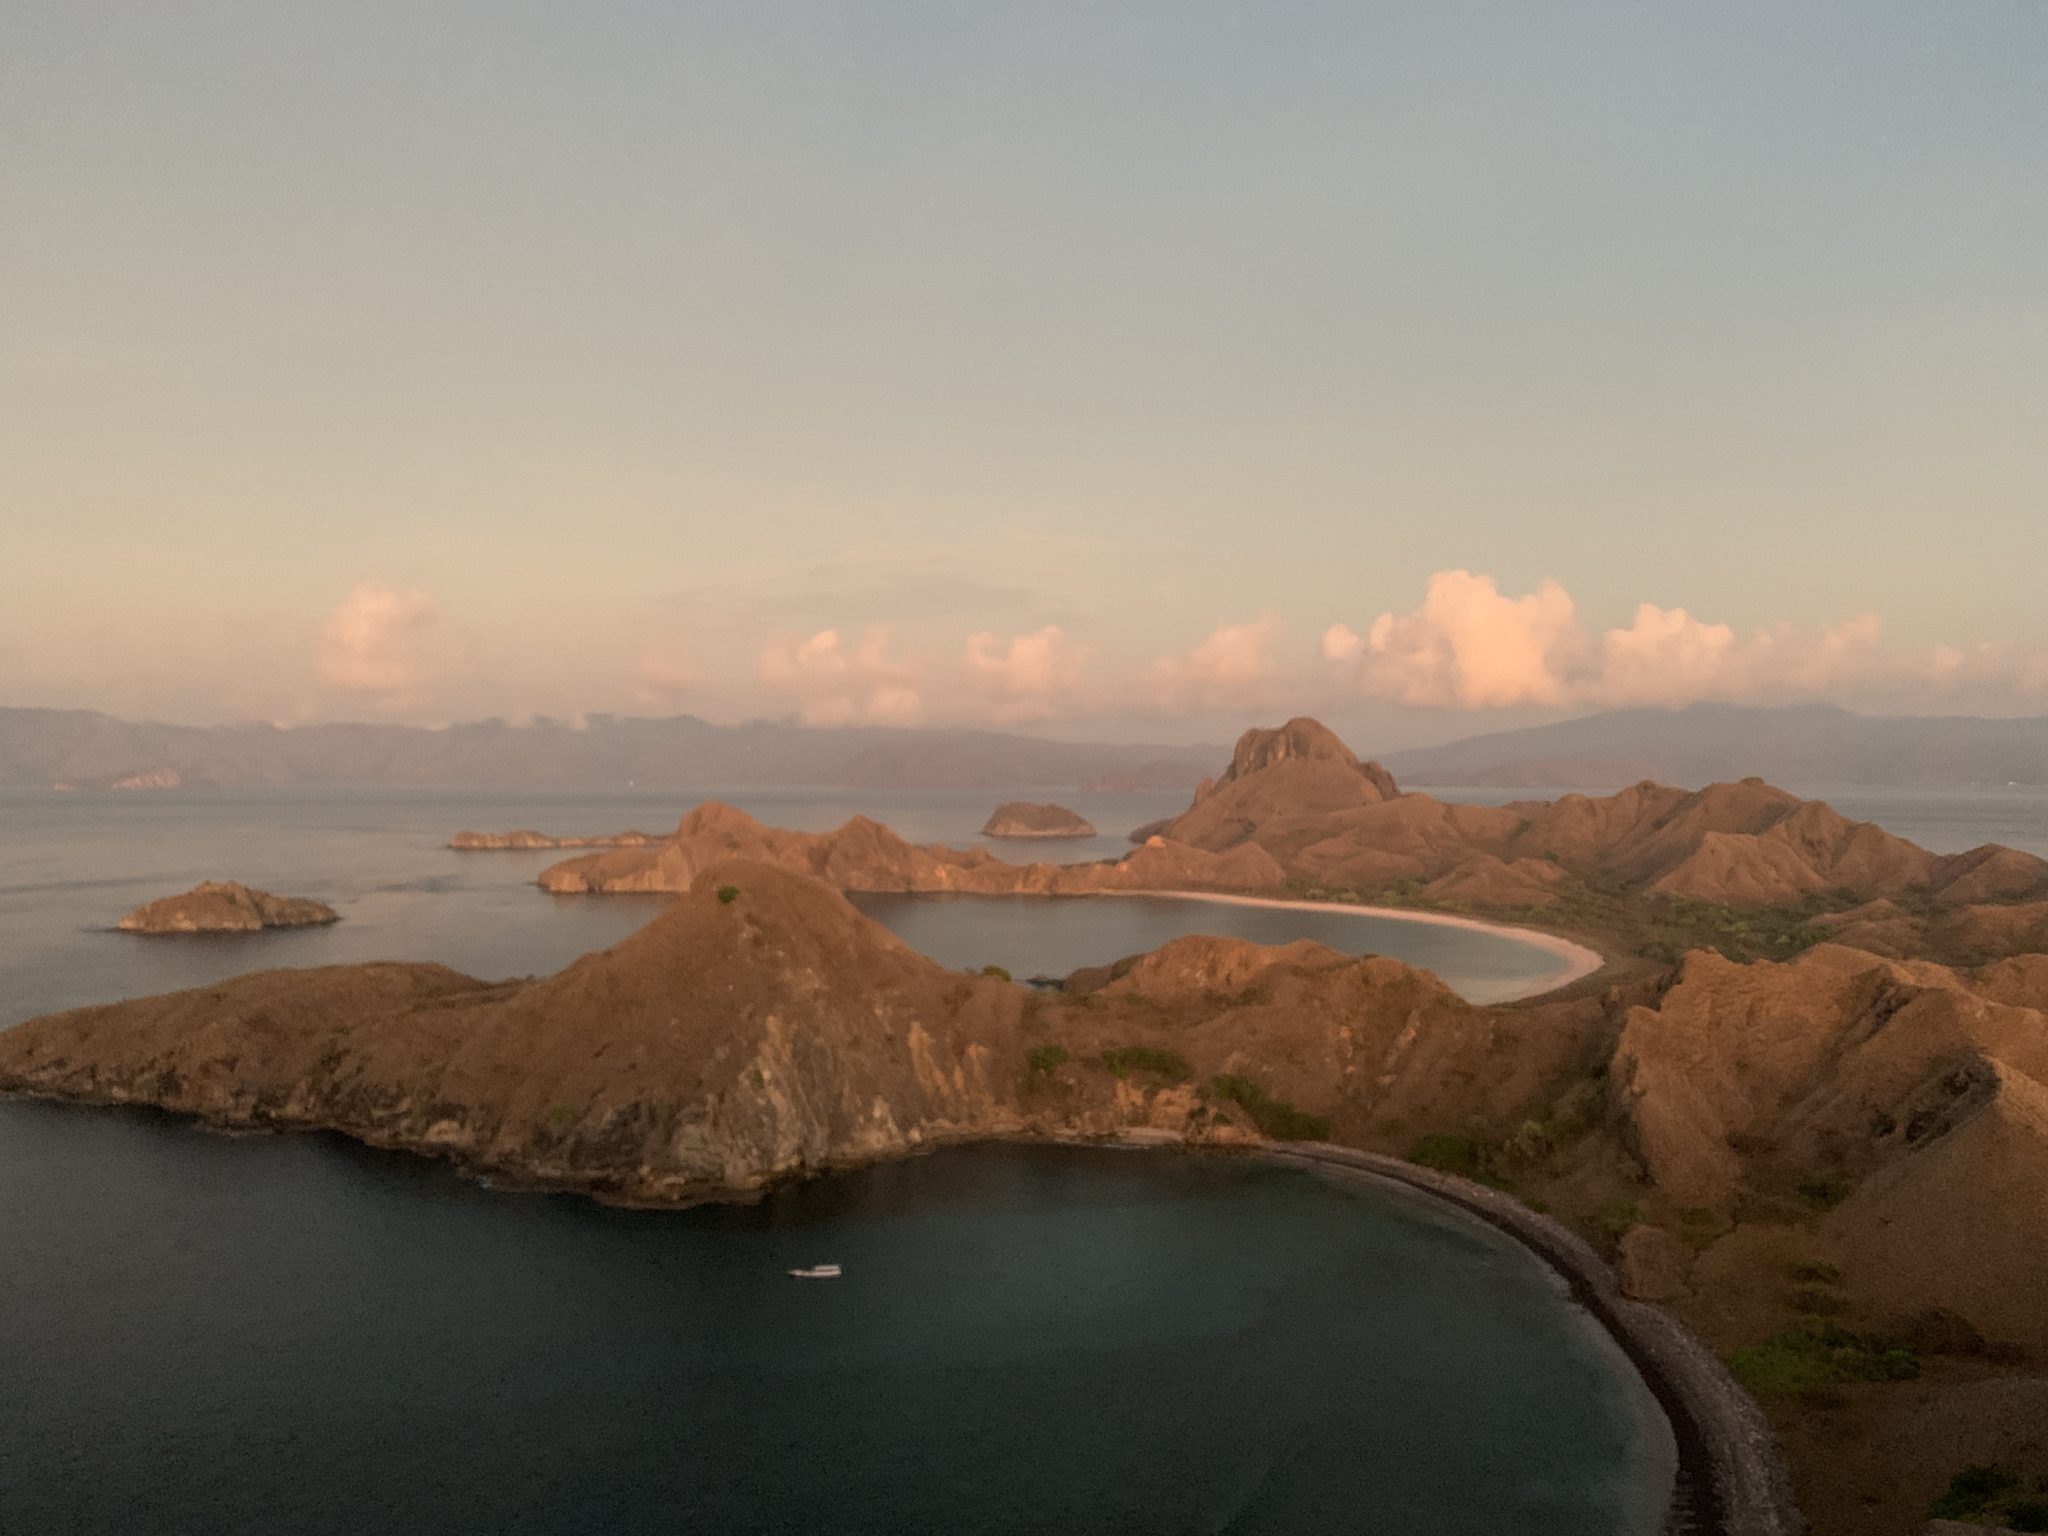 Morning view on Padar Island, Labuan Bajo, Indonesia. Long view of a rocky island with many inlets, puffy clouds on the horizon.